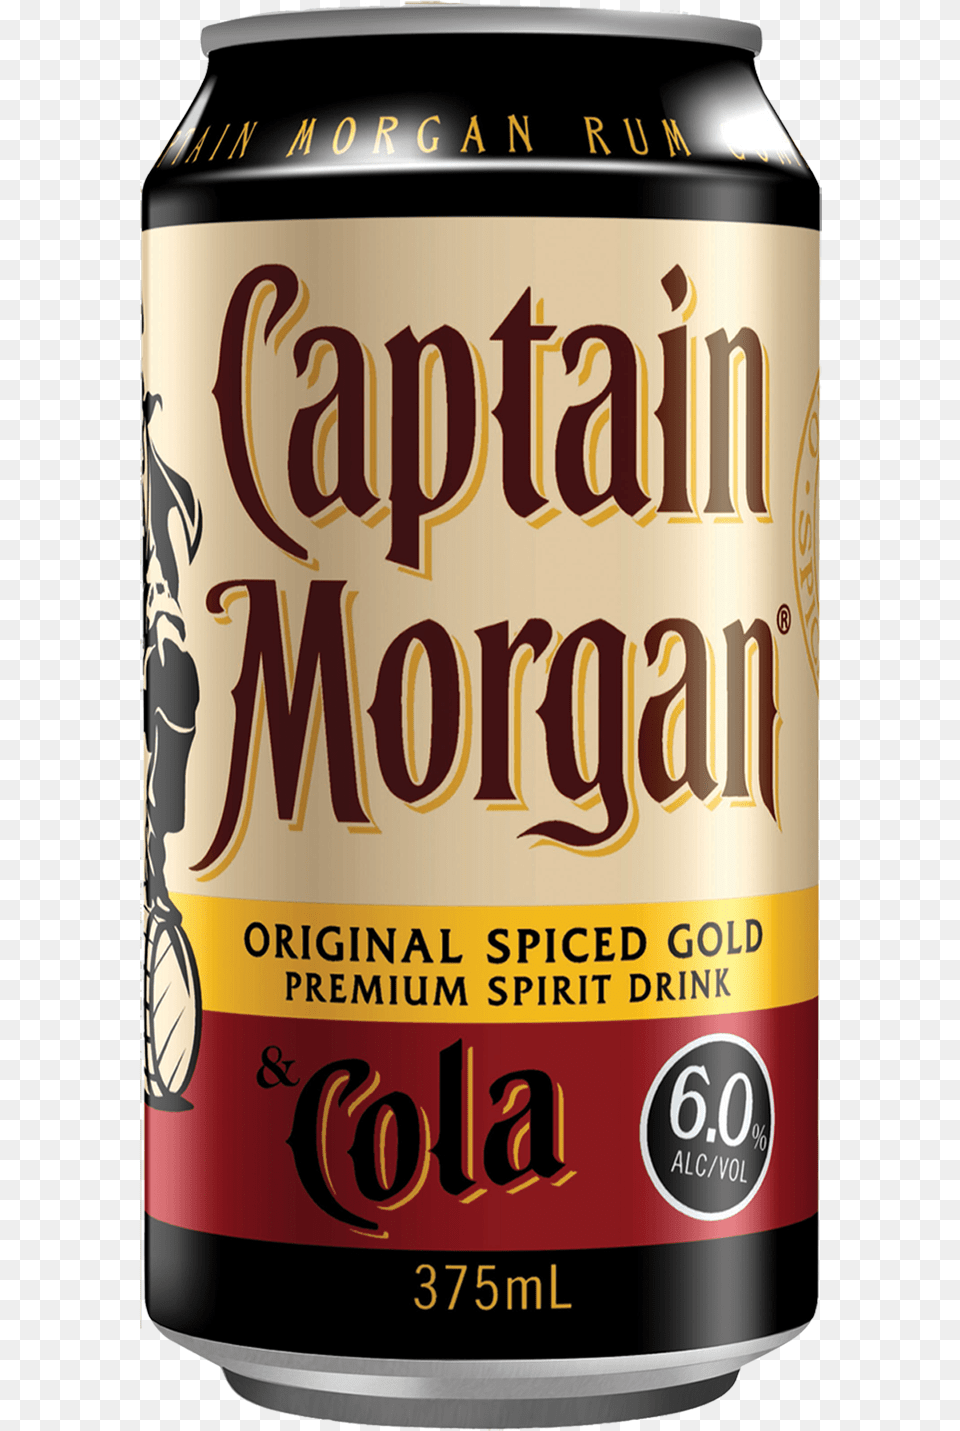 Captain Morgan Original Spiced Gold Amp Cola Cans 375ml Captain Morgan Spiced Rum Can, Alcohol, Beer, Beverage, Lager Png